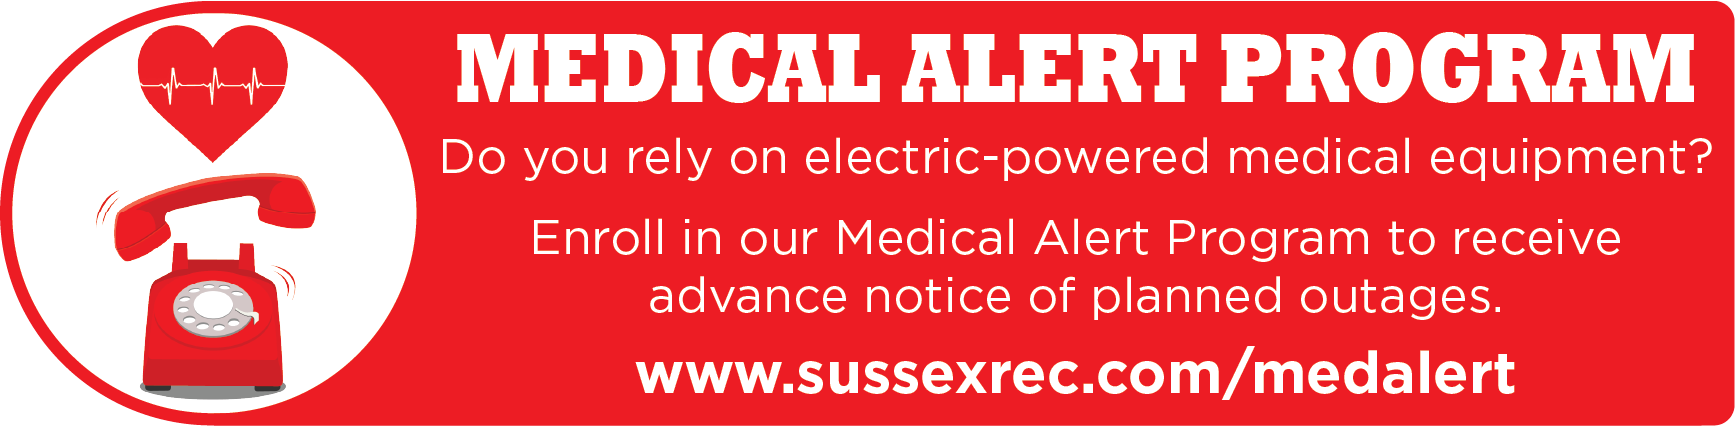 MEDICAL ALERT PROGRAM - Do you rely on electric-powered medical equipment? Enroll in our Medical Alert Program to receive advance notice of planned outages. www.sussexrec.com/medalert